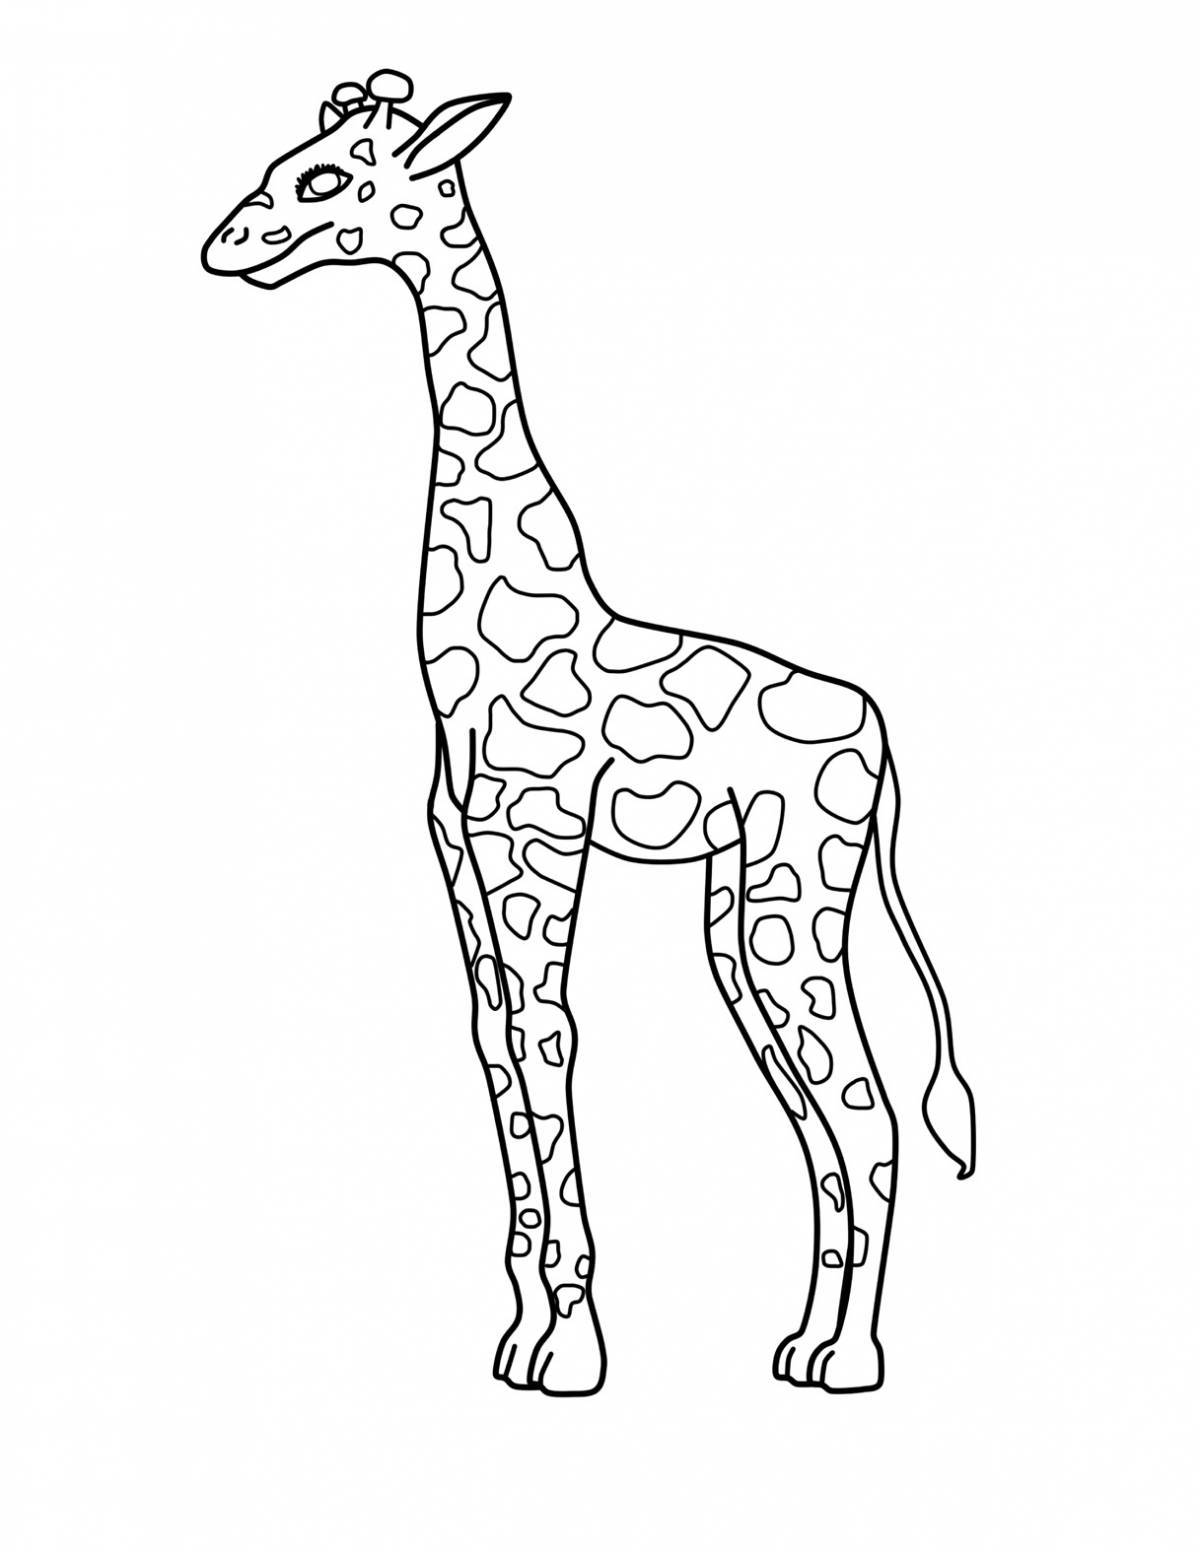 Playful giraffe coloring page for kids